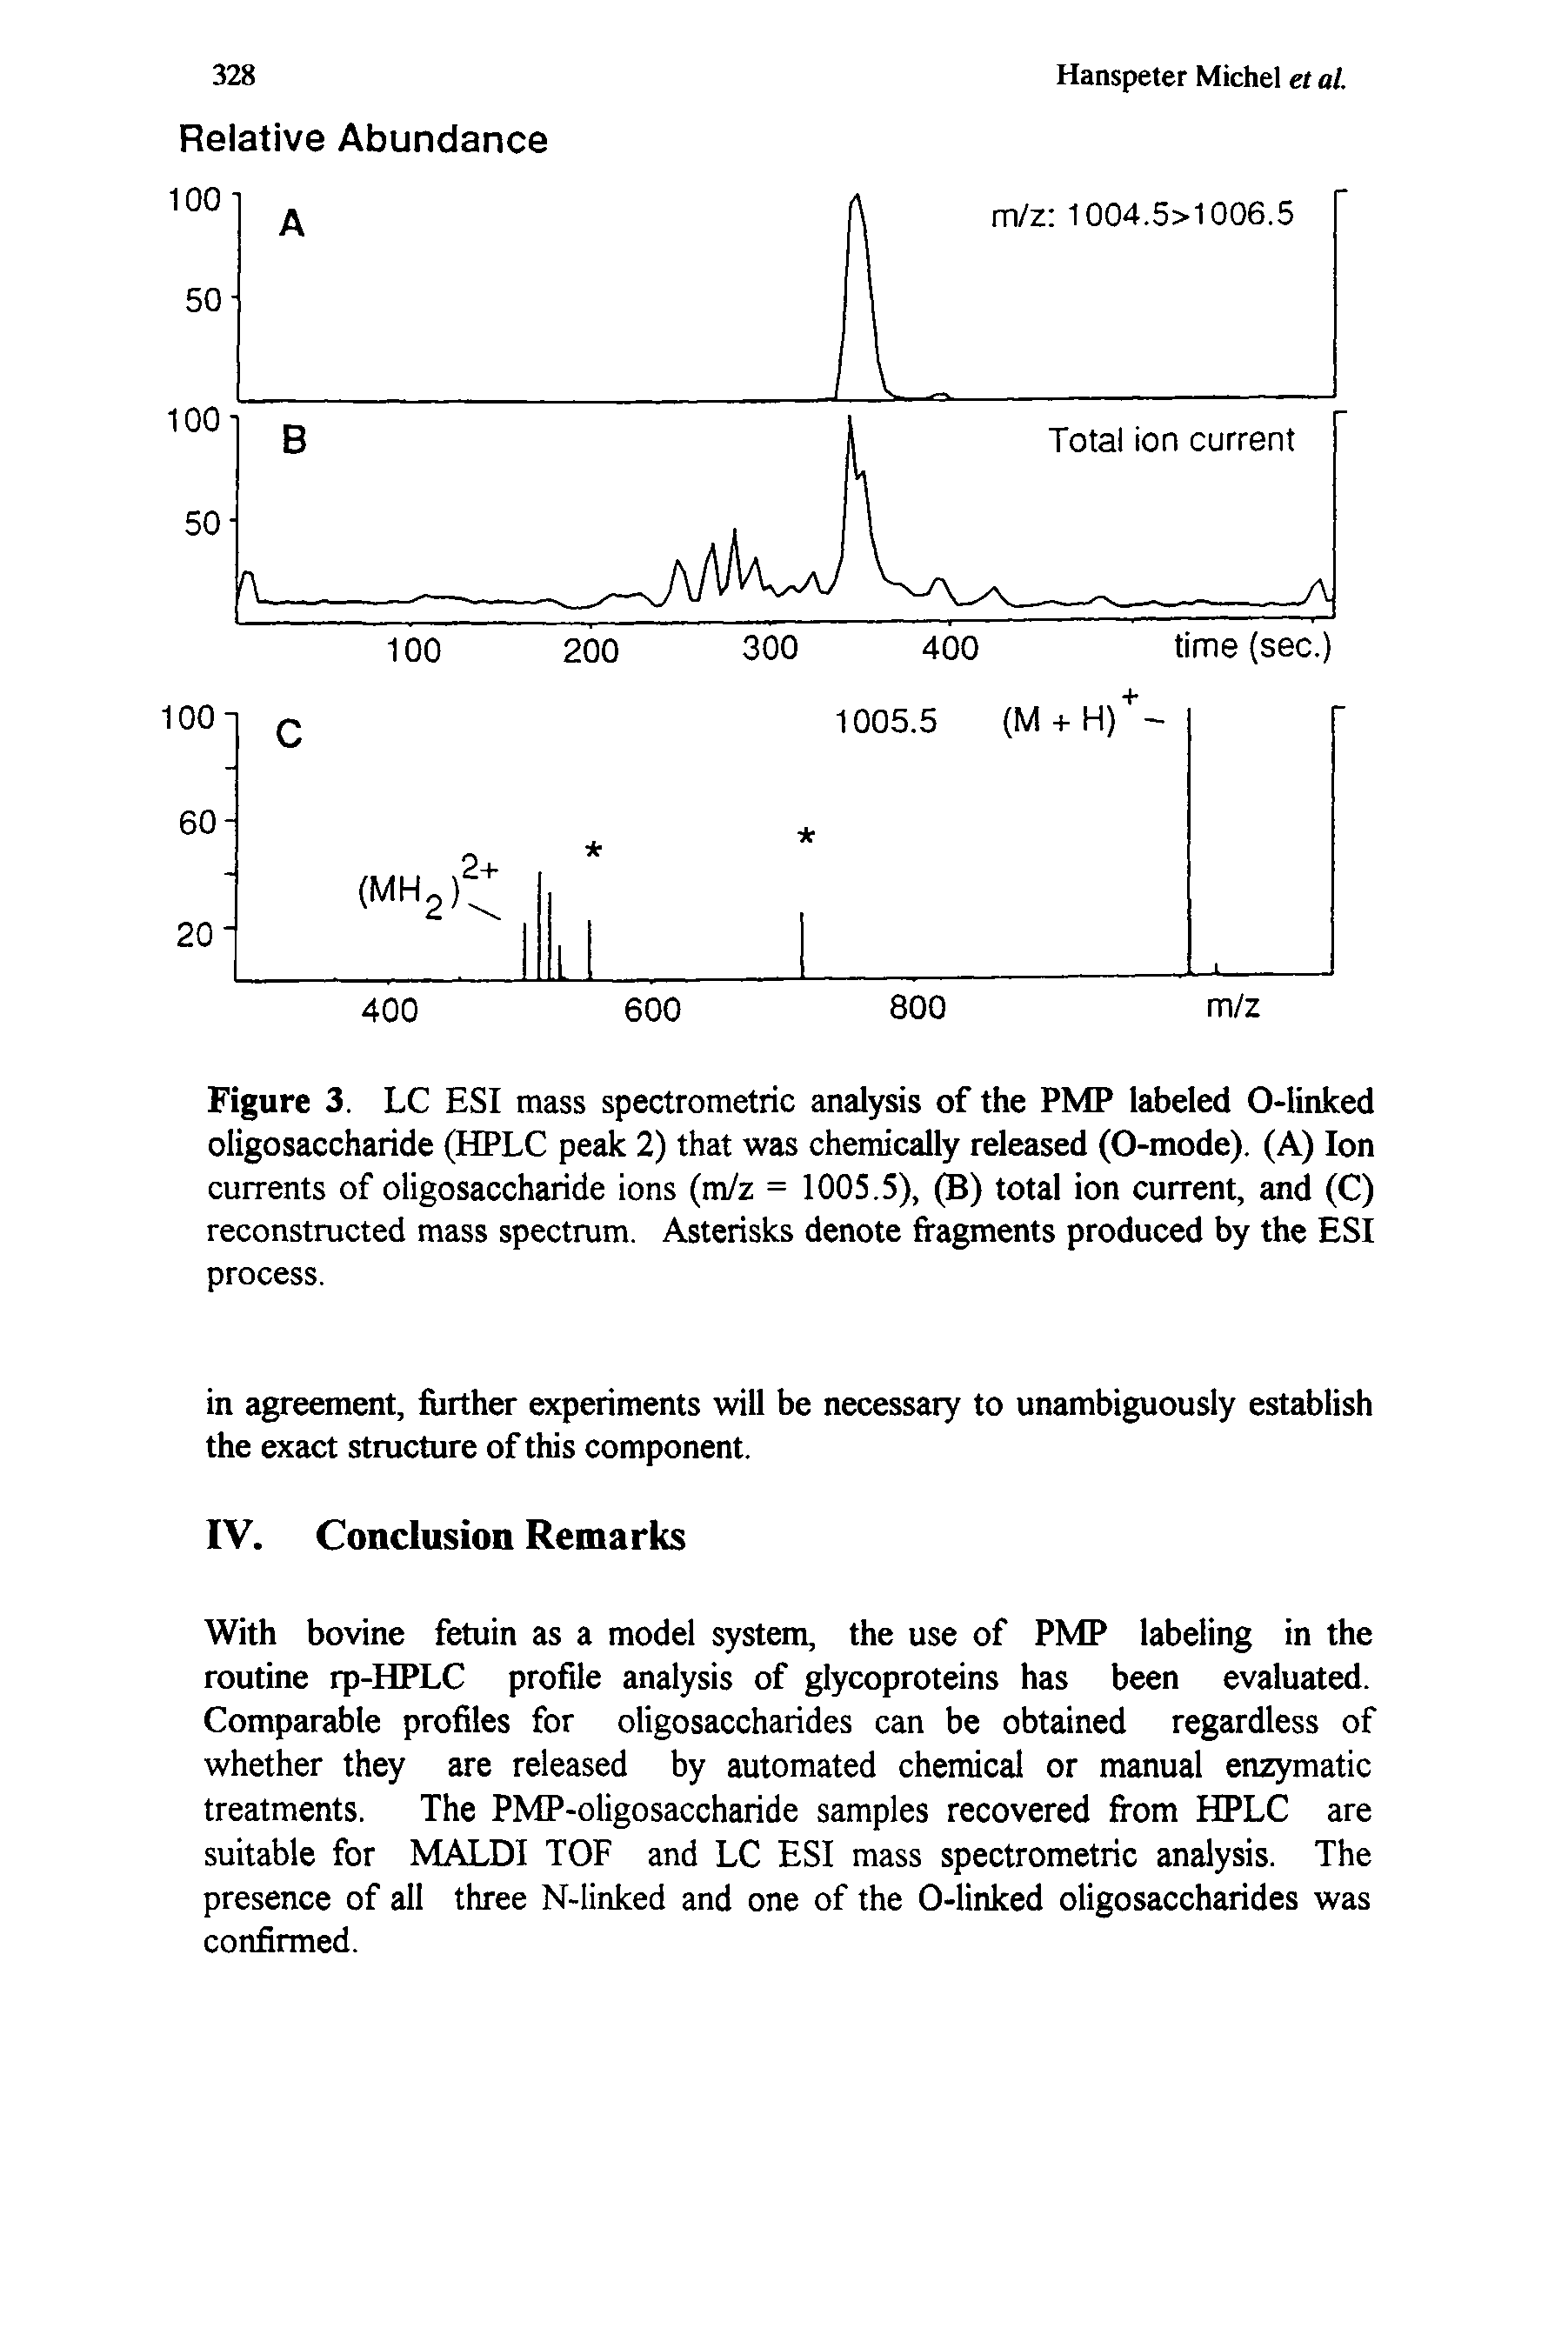 Figure 3. LC ESI mass spectrometric analysis of the PMP labeled 0-linked oligosaccharide (HPLC peak 2) that was chemically released (0-mode). (A) Ion currents of oligosaccharide ions (m/z = 1005.5), (B) total ion current, and (C) reconstructed mass spectrum. Asterisks denote fragments produced by the ESI process.